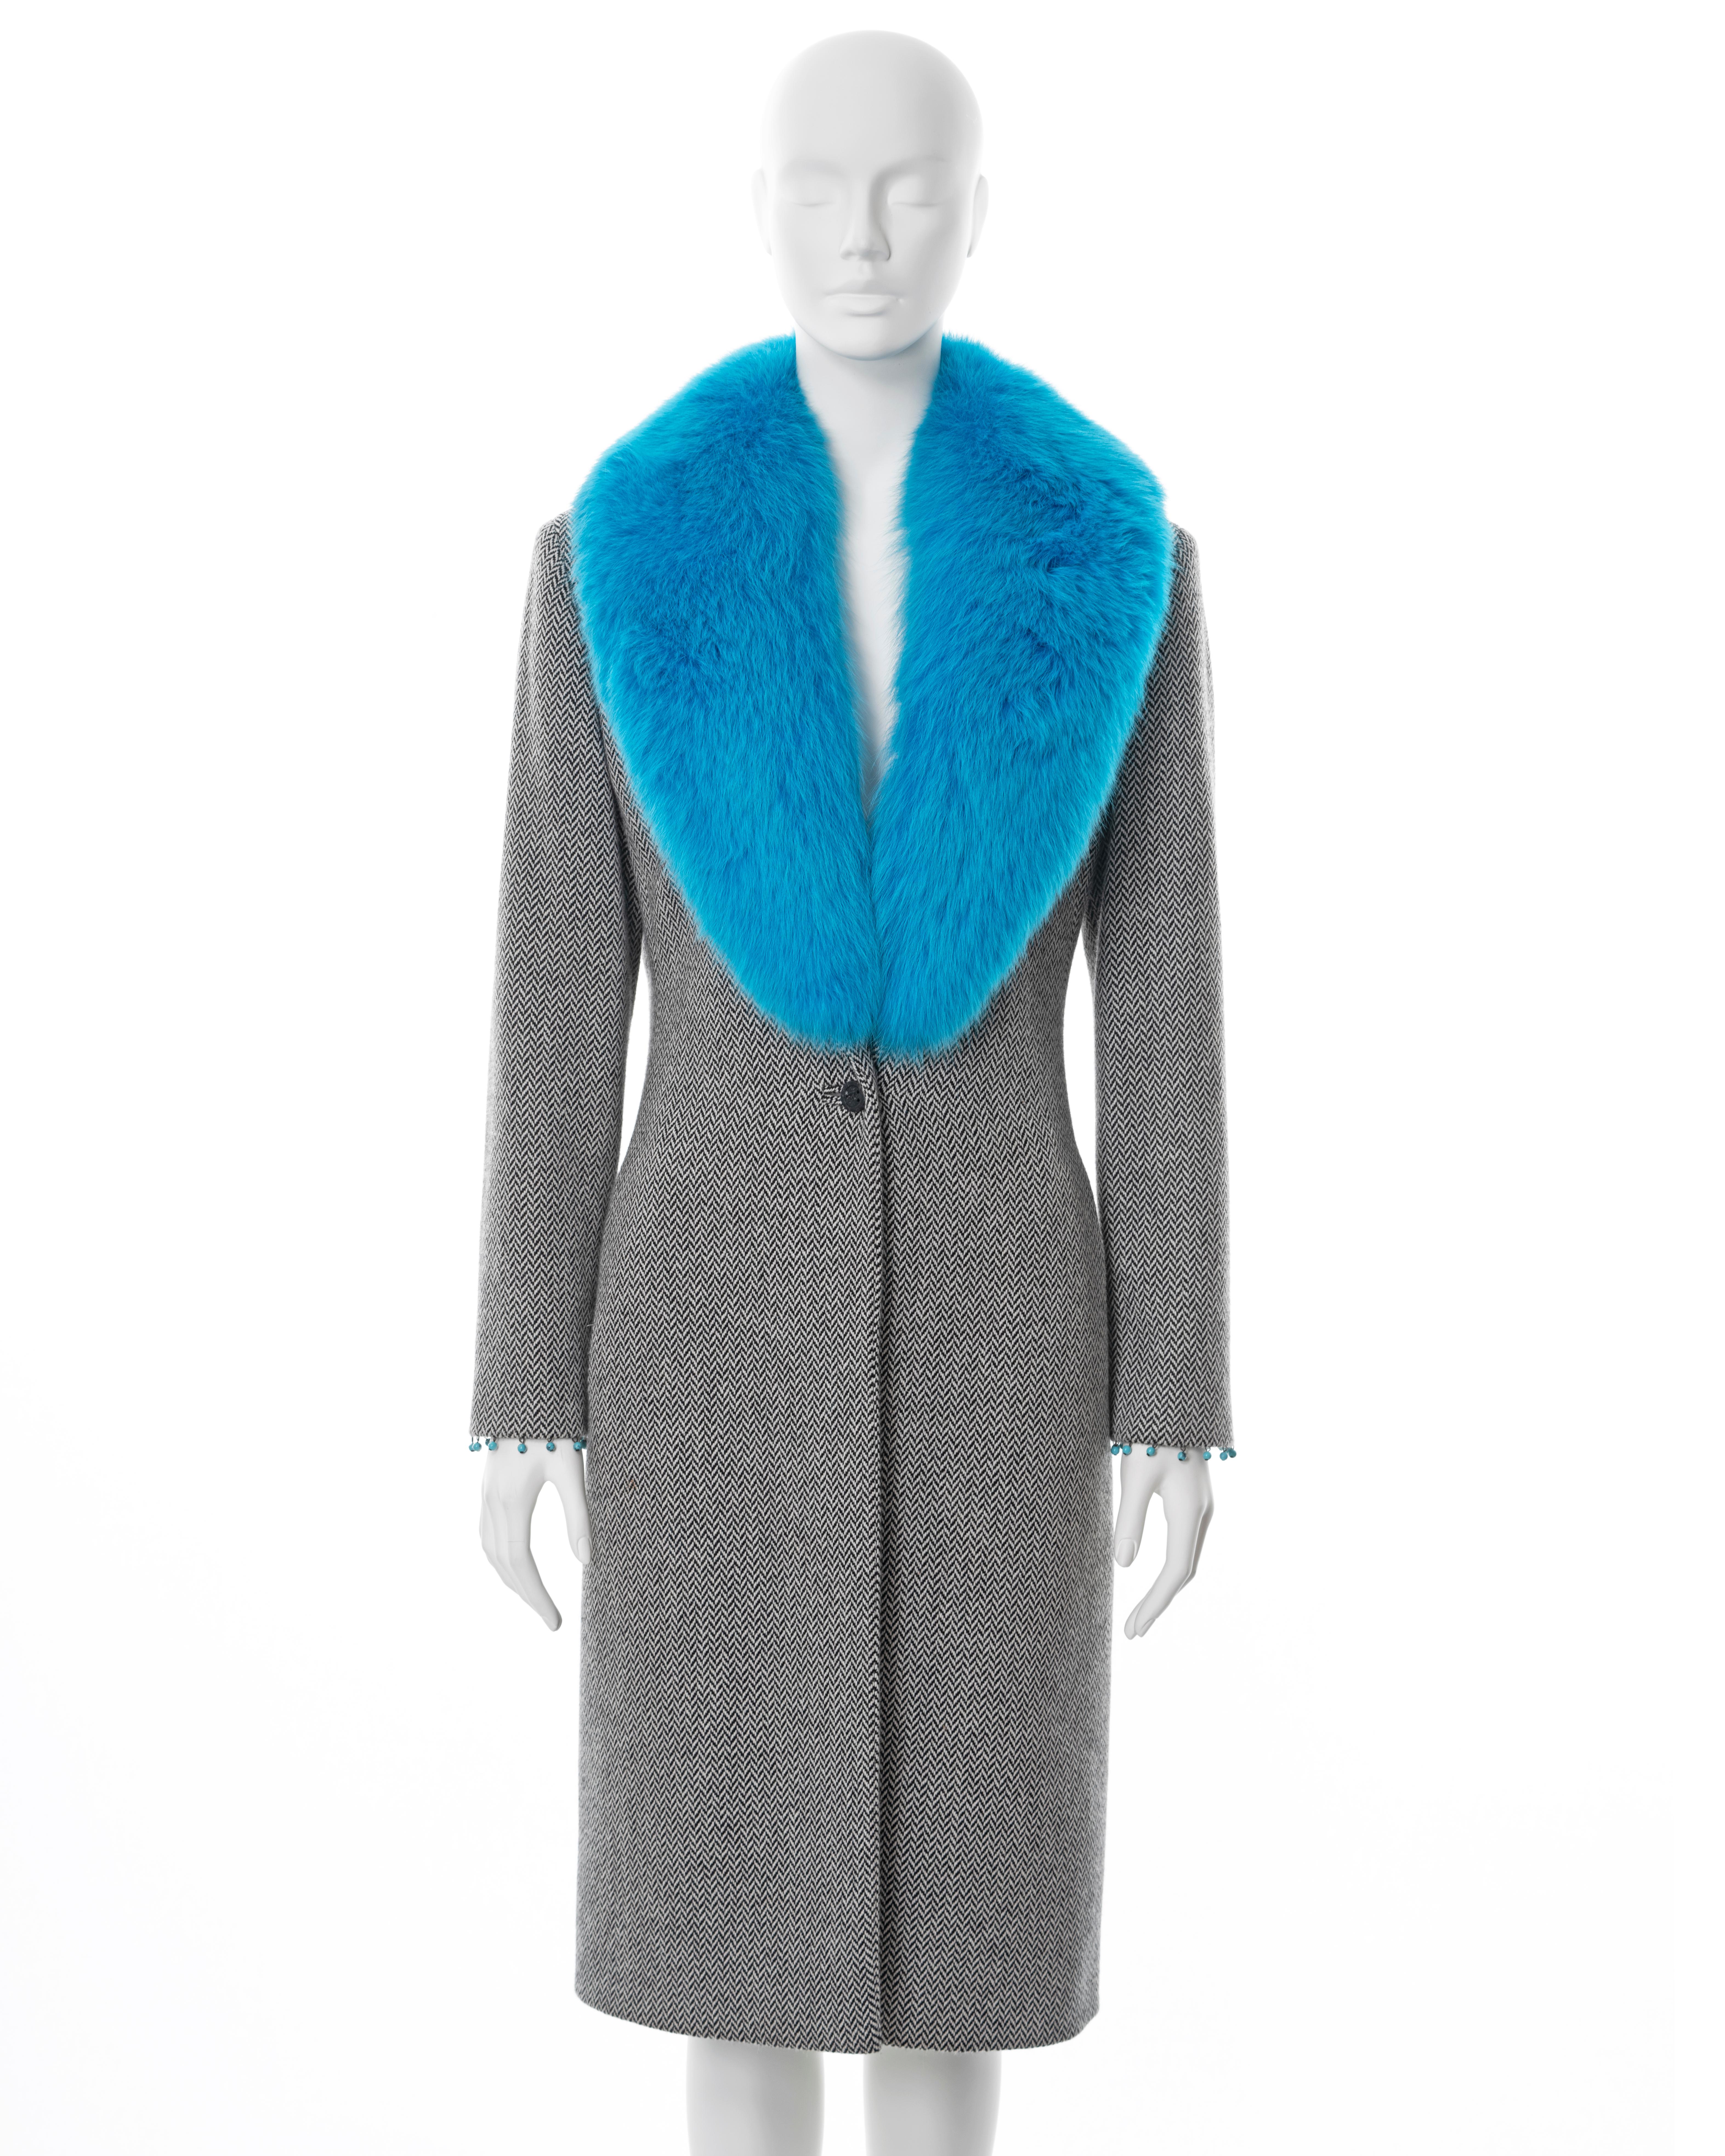 ▪ Gianni Versace tweed coat 
▪ Designed by Donatella Versace
▪ Sold by One of a Kind Archive
▪ Fall-Winter 1999
▪ Constructed from black and white herringbone cashmere-wool tweed 
▪ Detachable blue fox fur collar 
▪ Turquoise bead tassel trim on